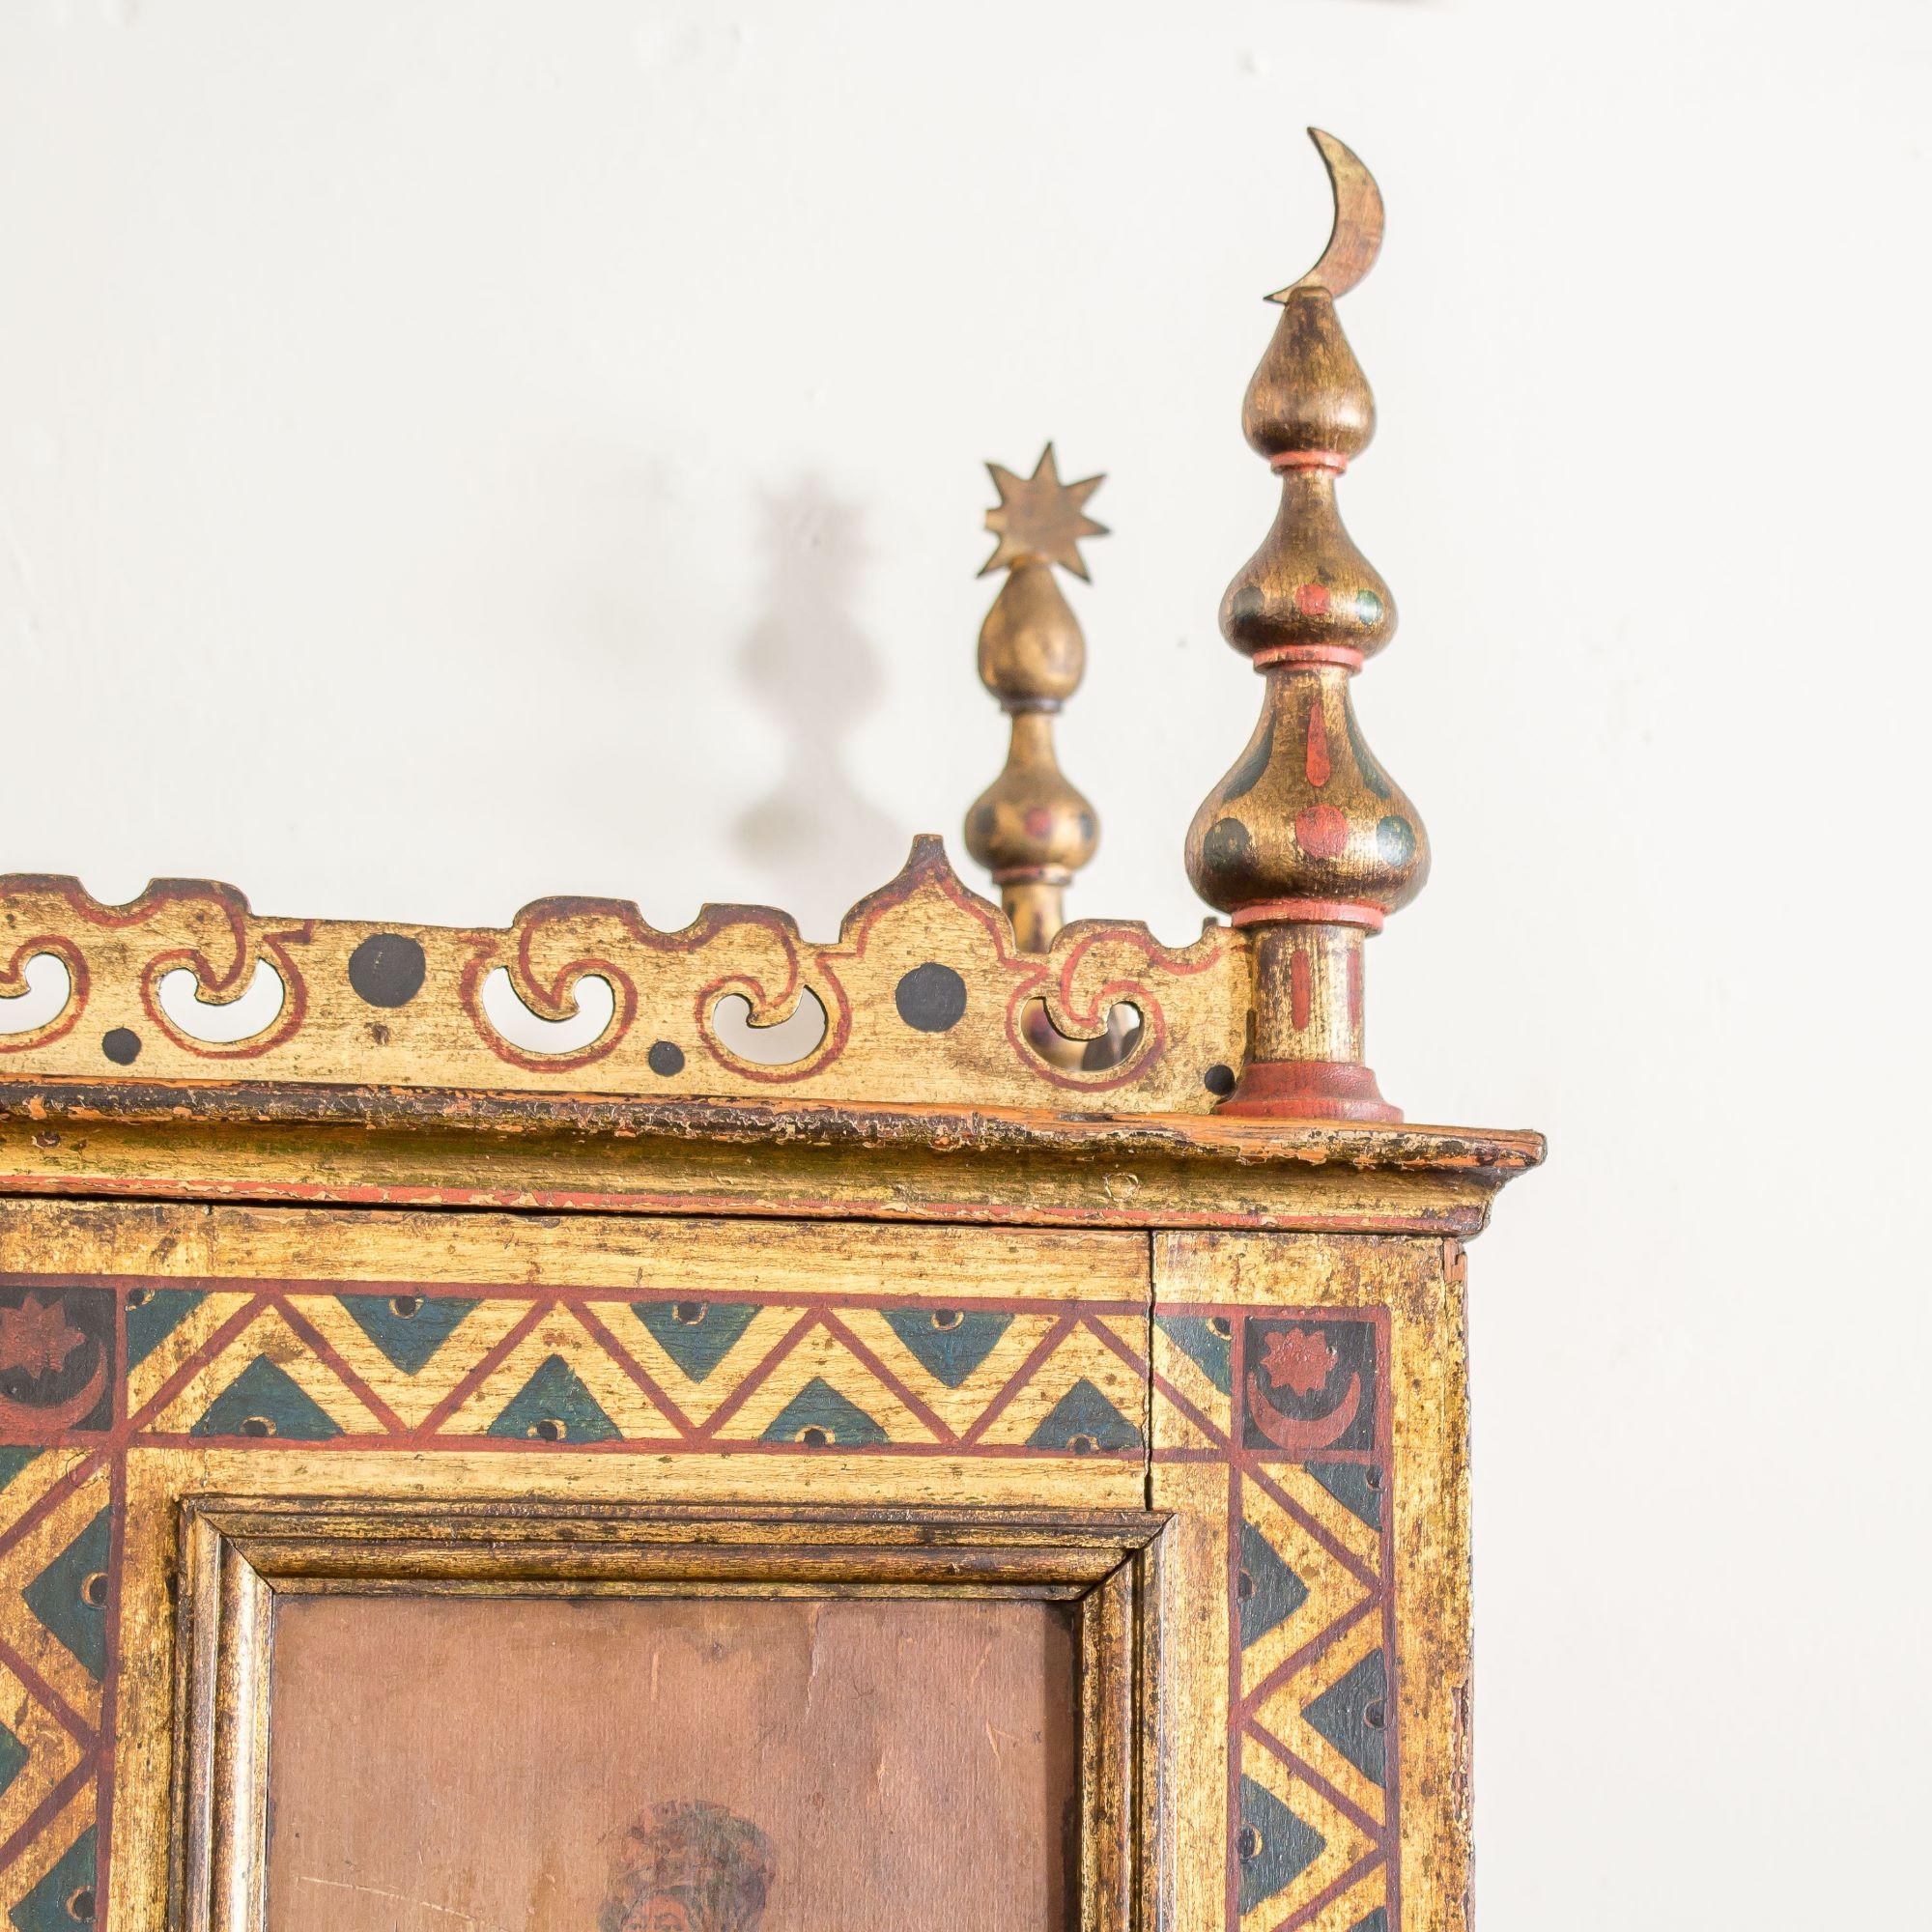 The two doors decorated with painted and gilt zig-zag borders surrounding four Russian figures enclosing 24 drawers. Each top corner with Moorish finials complete with stars and moons joined by a pierced Moorish apron.

With pencil writing and an